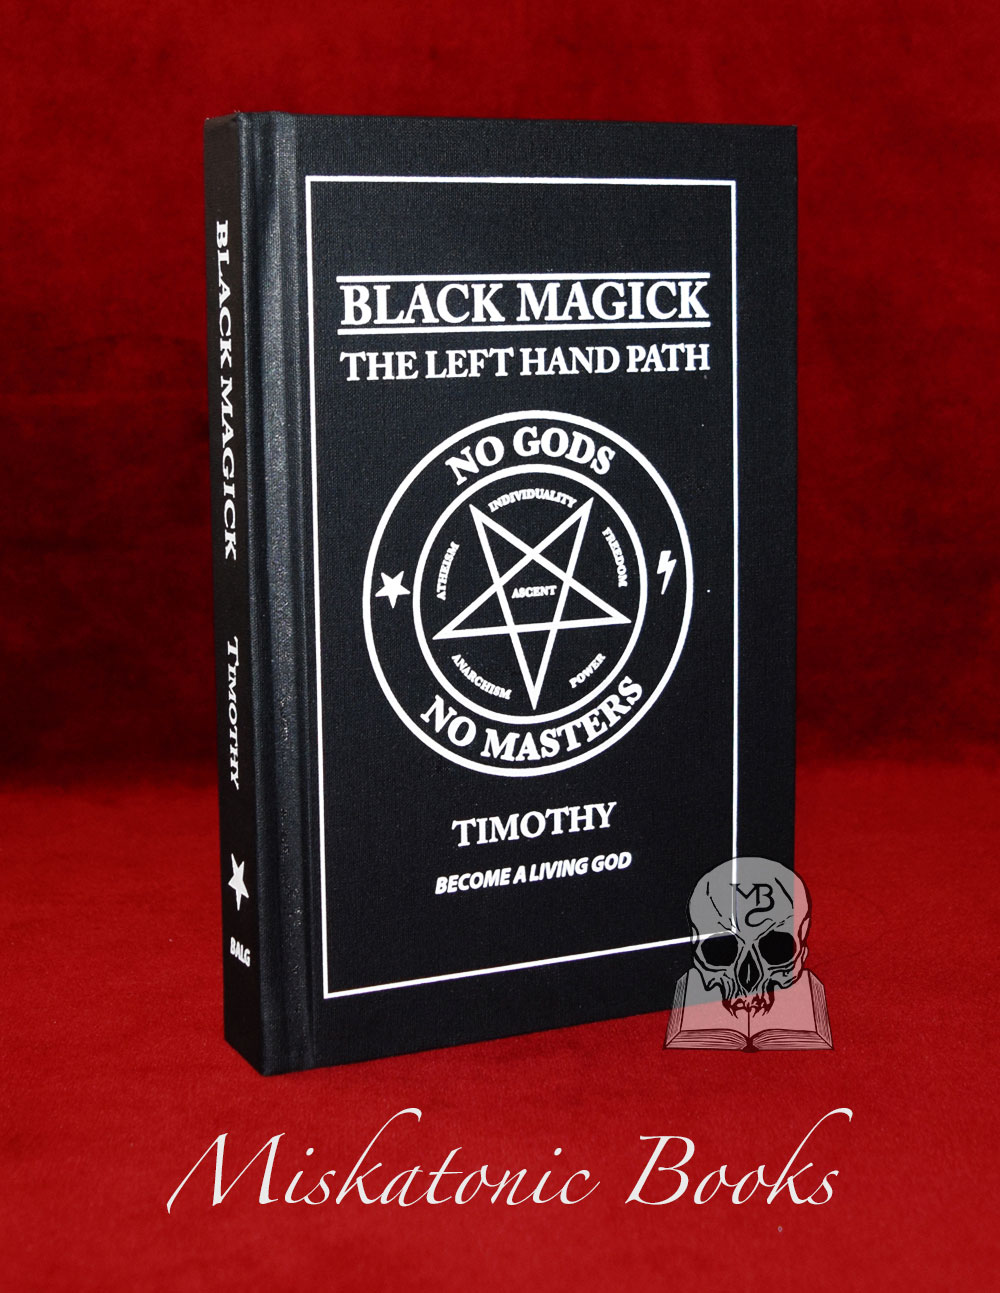 BLACK MAGICK: THE LEFT HAND PATH by Timothy (Limited Edition Hardcover of only 100 copies)